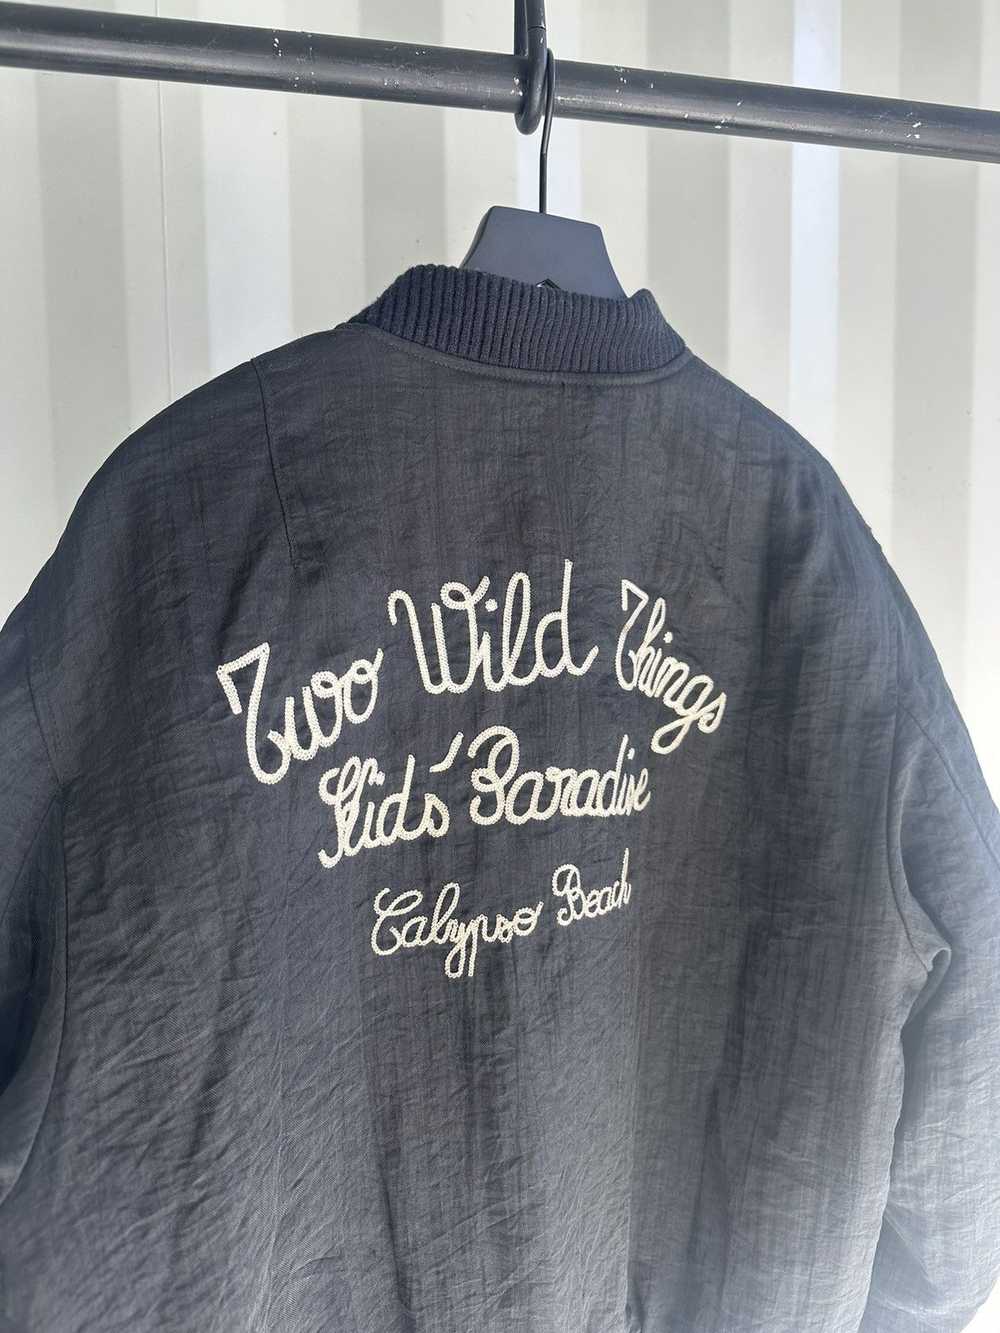 Vintage Two Wild Things Chainstitch Flight Bomber - image 2